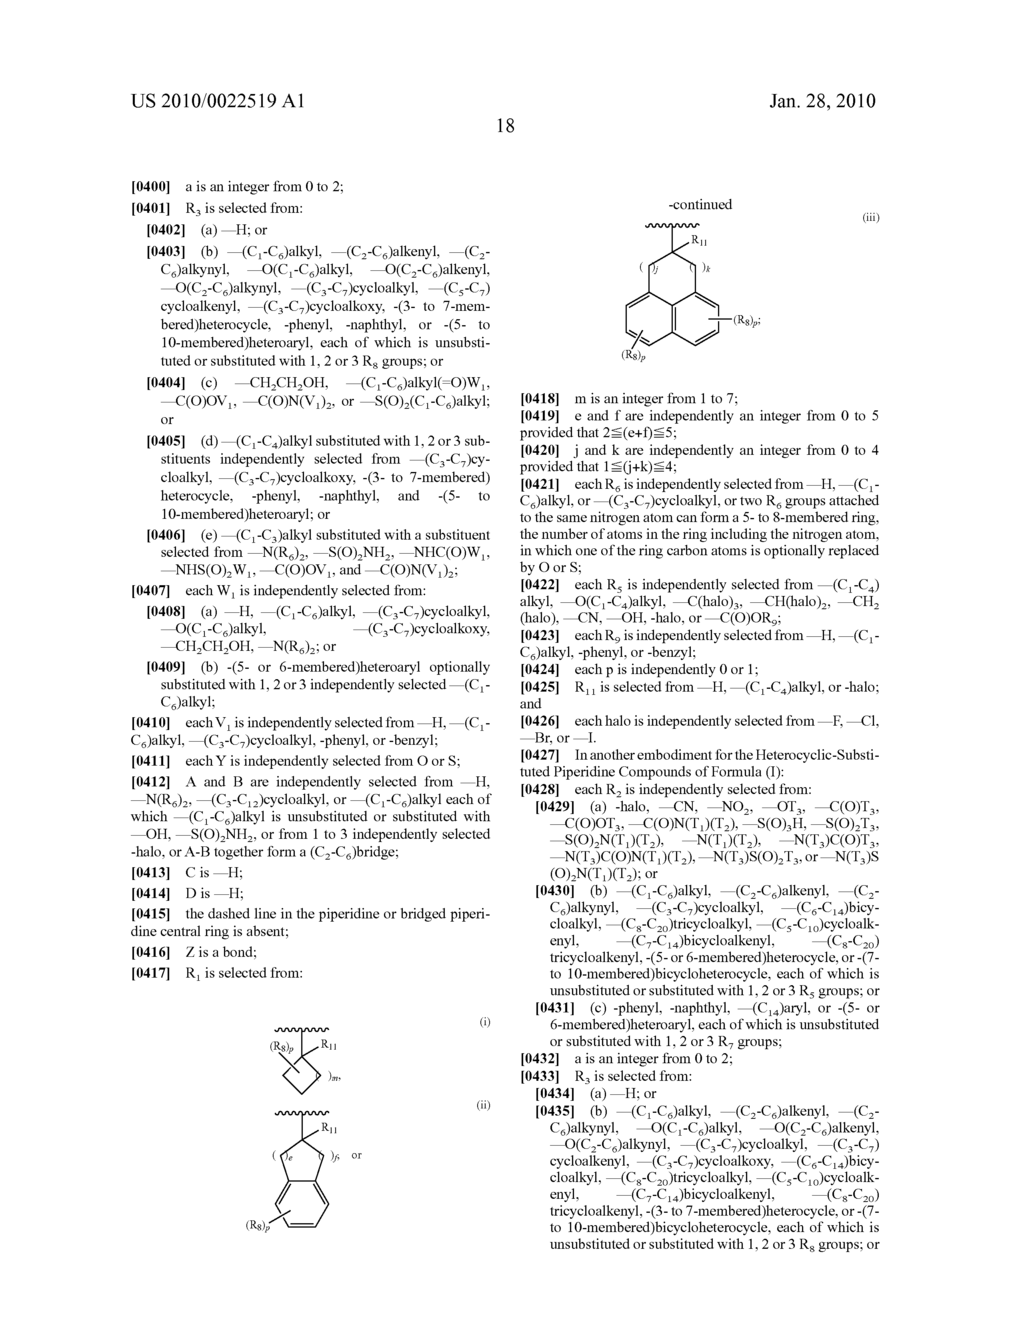 HETEROCYCLIC-SUBSTITUTED PIPERIDINE COMPOUNDS AND THE USES THEREOF - diagram, schematic, and image 19